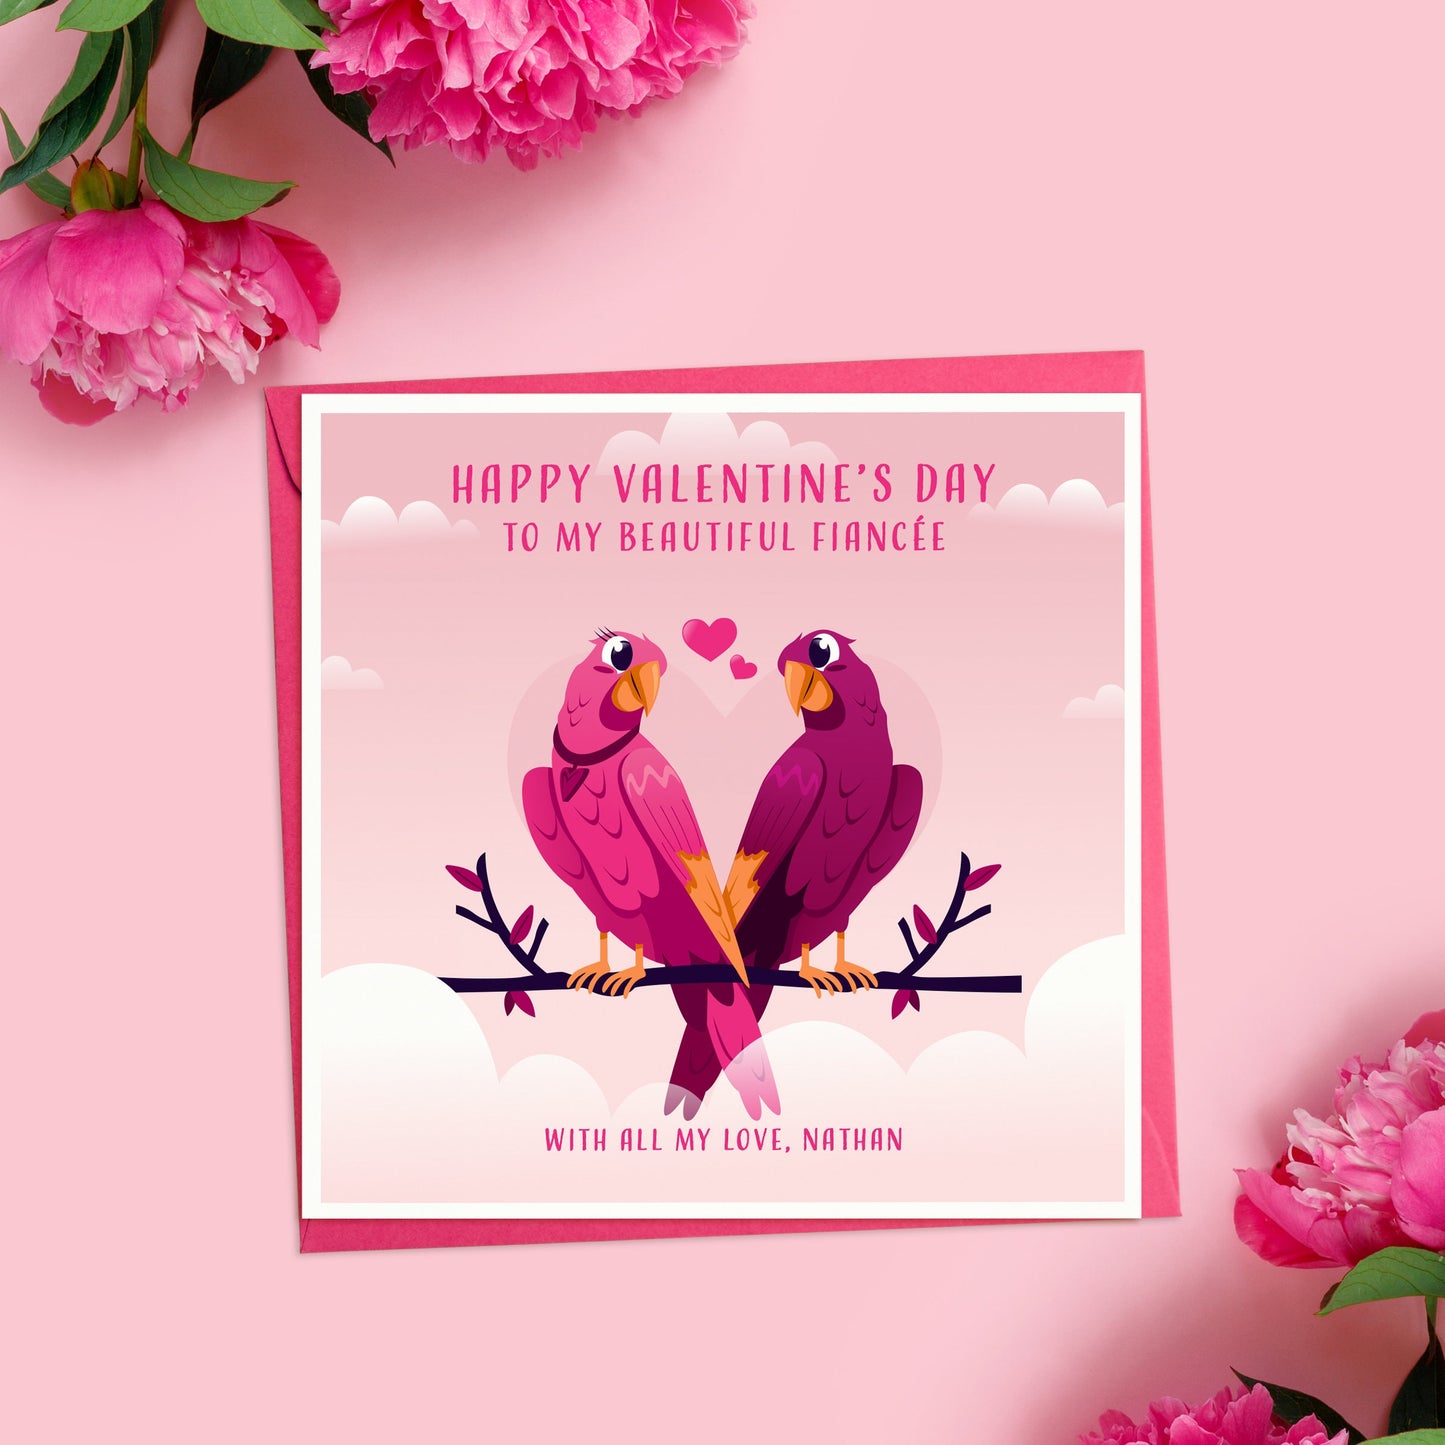 Personalised Love Birds Valentine's Day Card for Wife, Valentine's Cute Birds Card, Happy Valentines for Husband, Love Birds Valentines Card